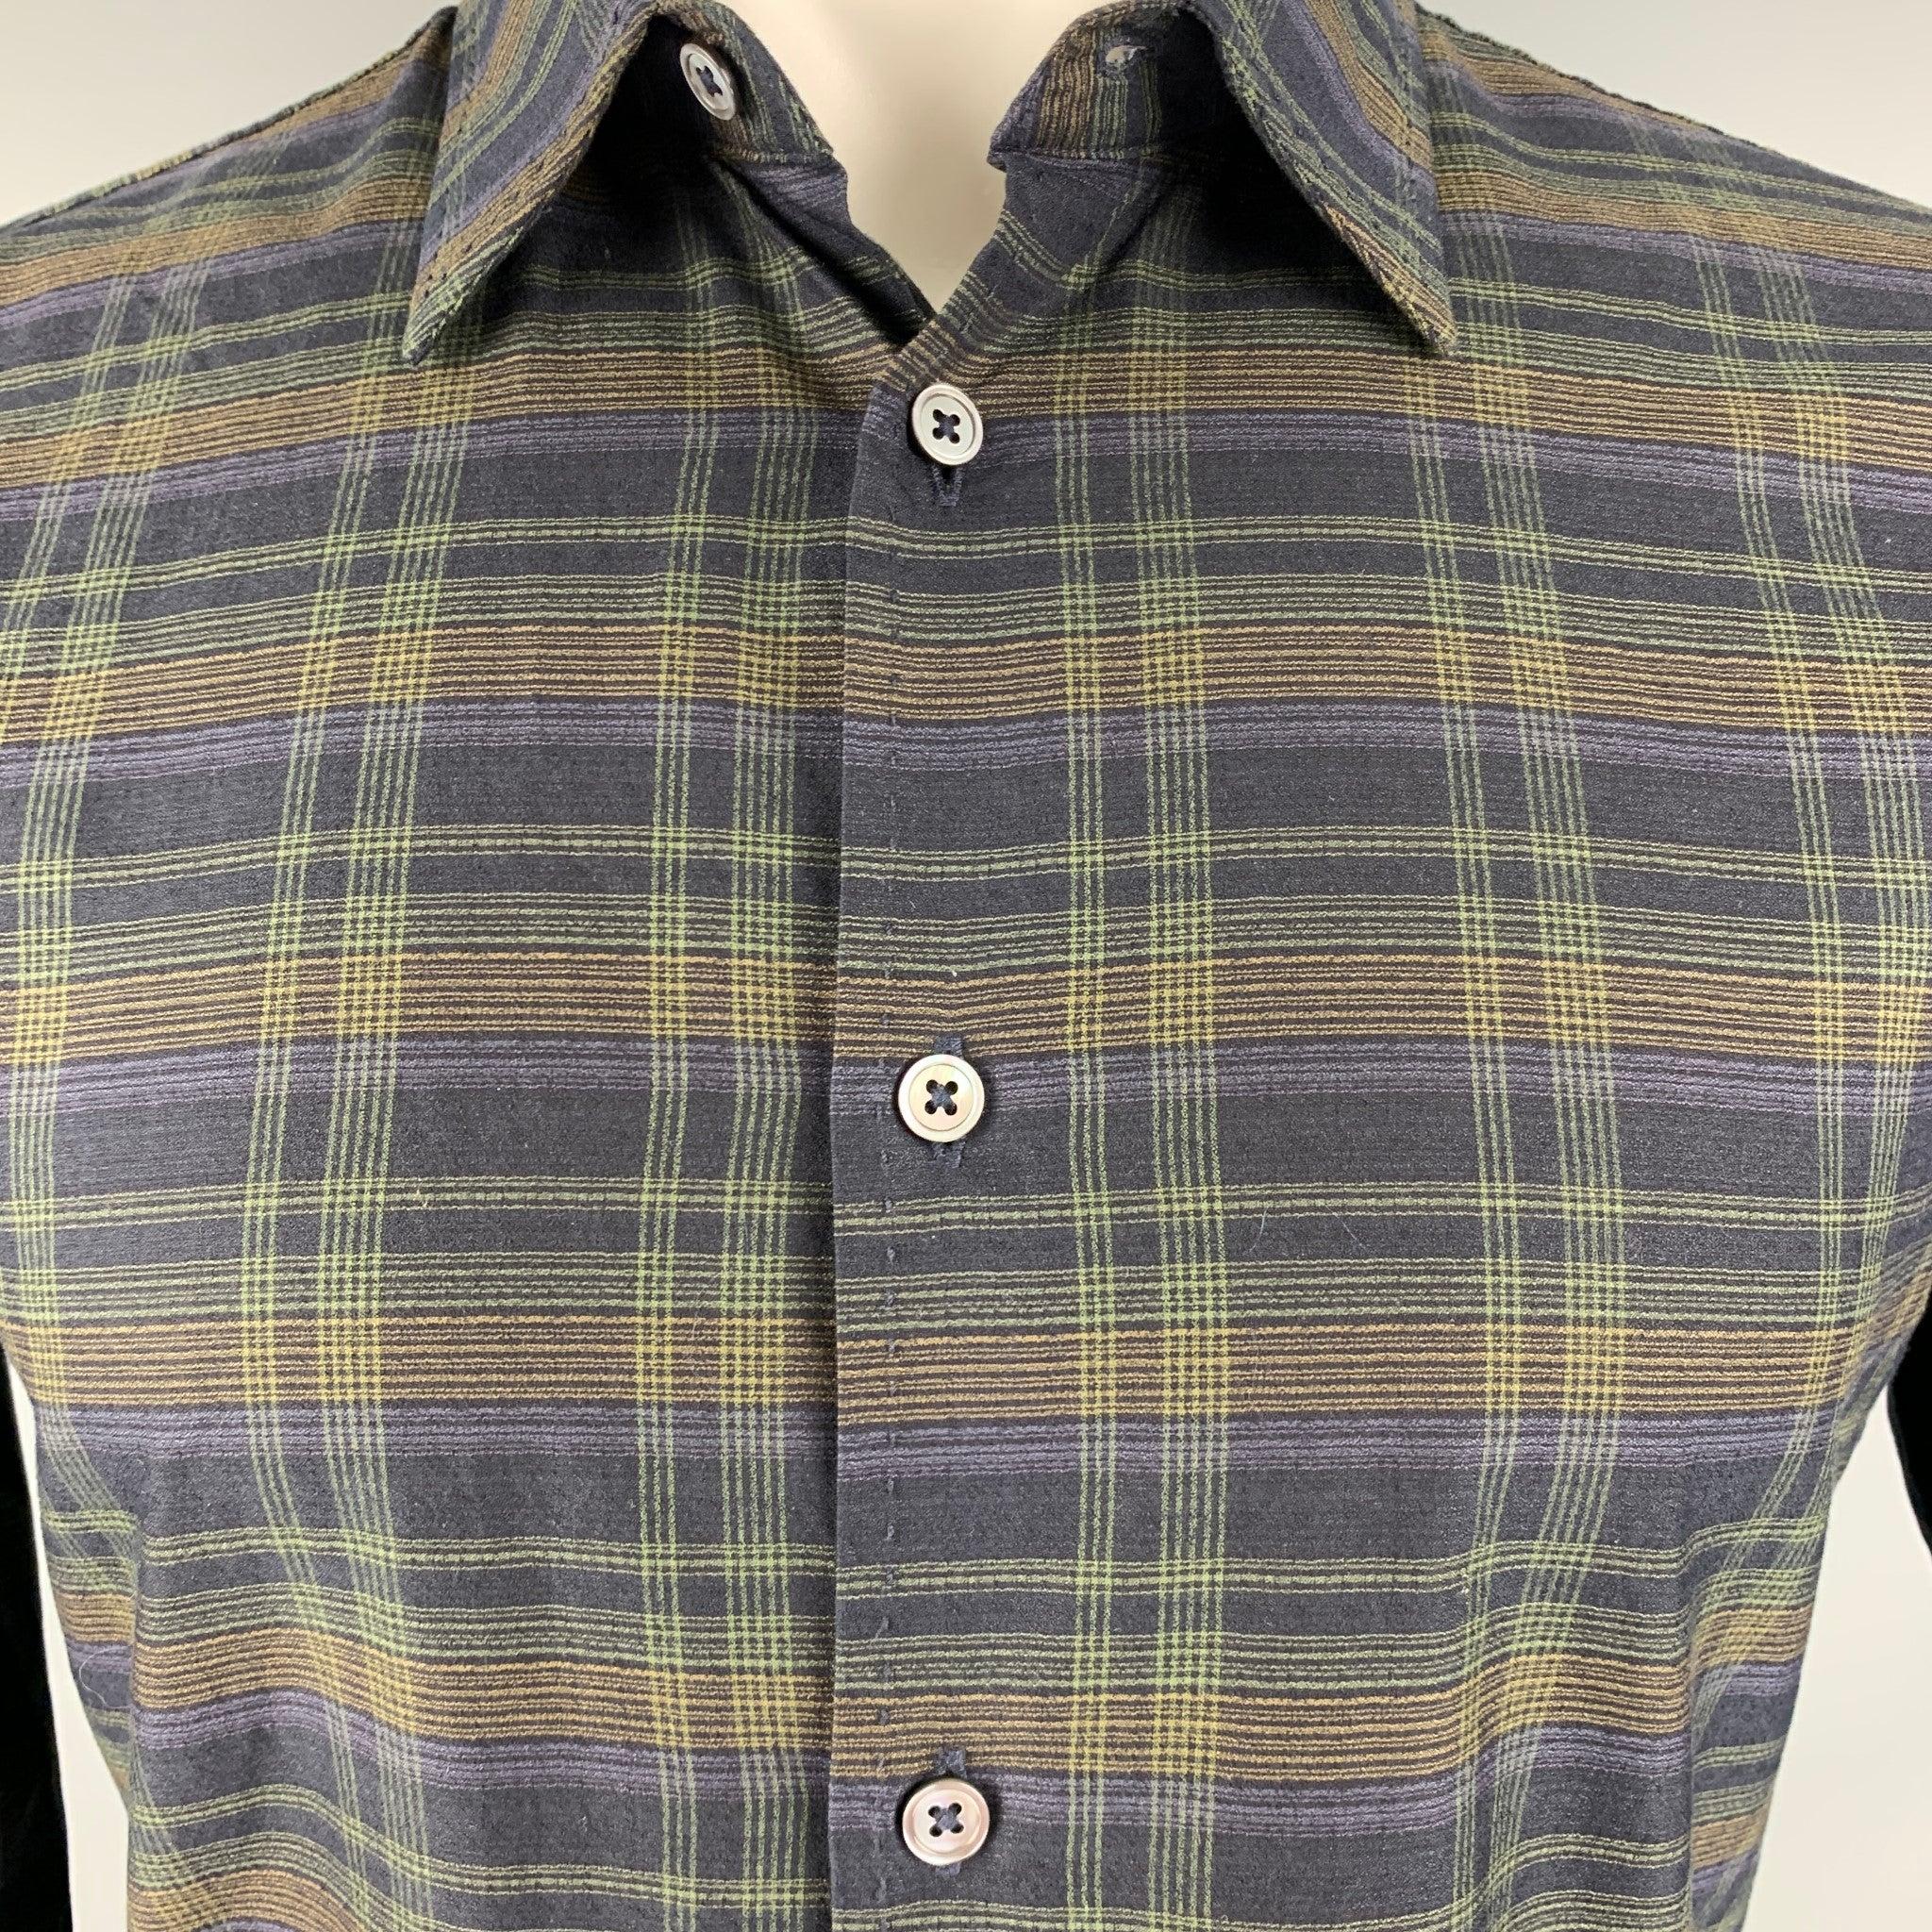 JOHN VARVATOS
long sleeve shirt in a black and green cotton fabric featuring all over plaid pattern, spread collar, and button closure.Excellent Pre-Owned Condition. 

Marked:   S 

Measurements: 
 
Shoulder: 18.5 inches Chest: 39 inches Sleeve: